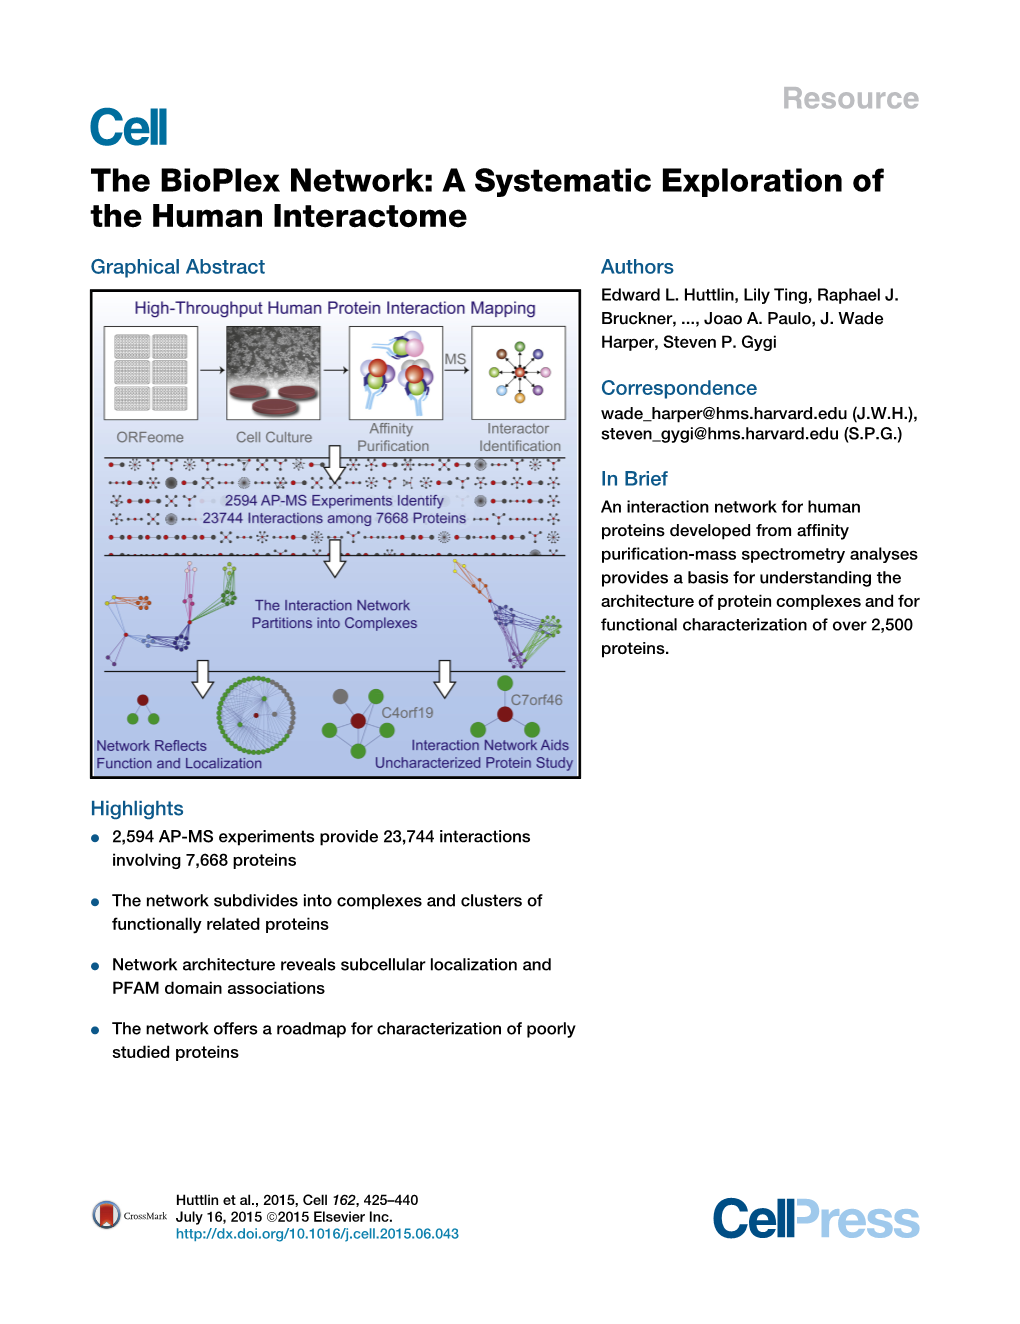 The Bioplex Network: a Systematic Exploration of the Human Interactome